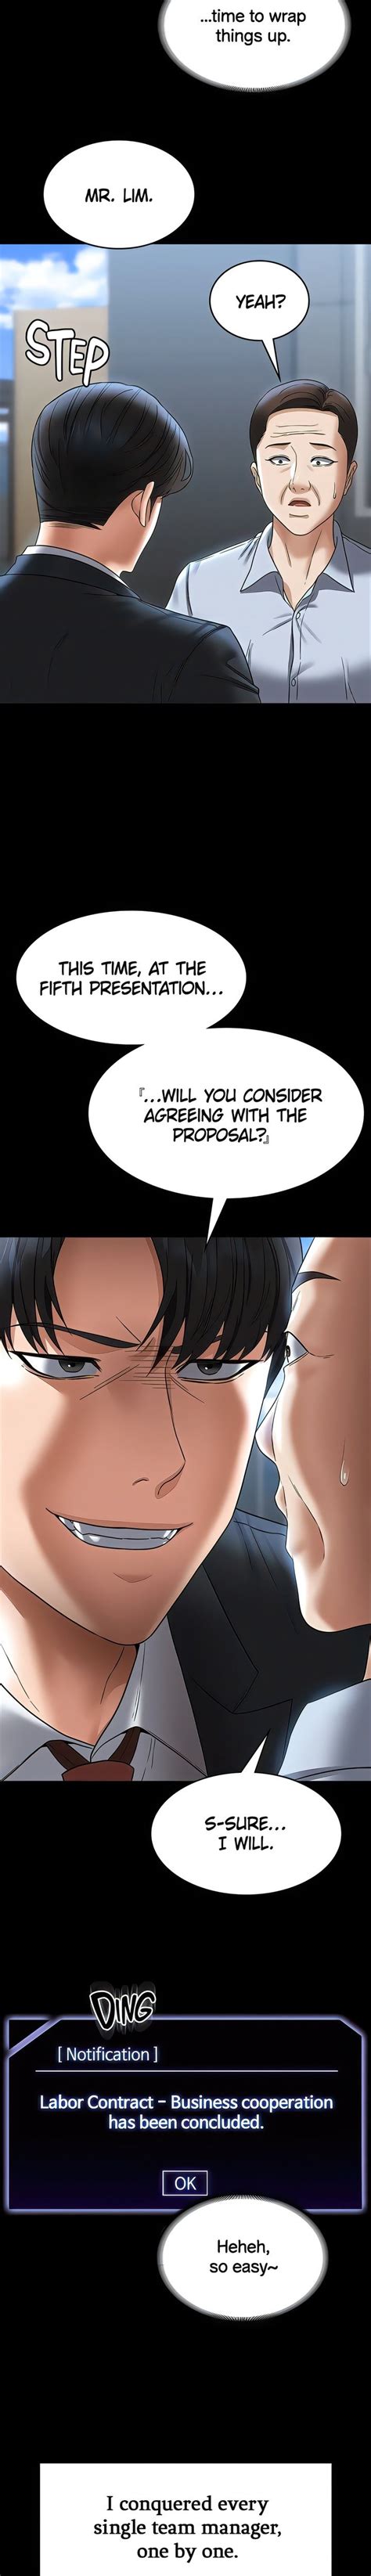 Supervisor access 87. Chapter 97.5 raw October 30, 2023. Chapter 97.1 November 2, 2023. Hyun-Woo is an ordinary office worker whose life couldn’t get any more boring. His new life begins with the sound of a message beep…. ‘Engage in intercourse wit. 